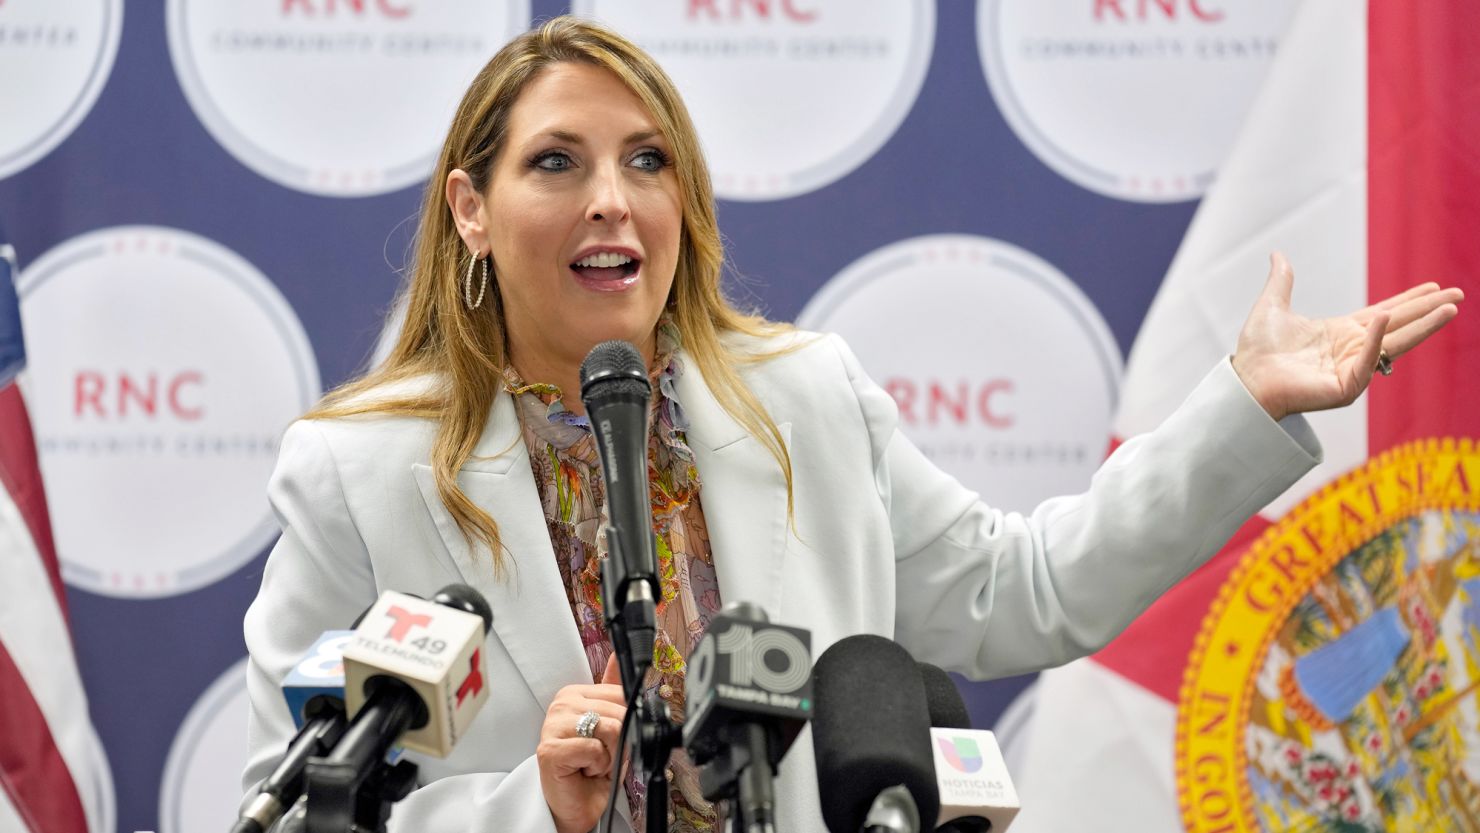 RNC Chairwoman acknowledges GOP frustration after election losses CNN